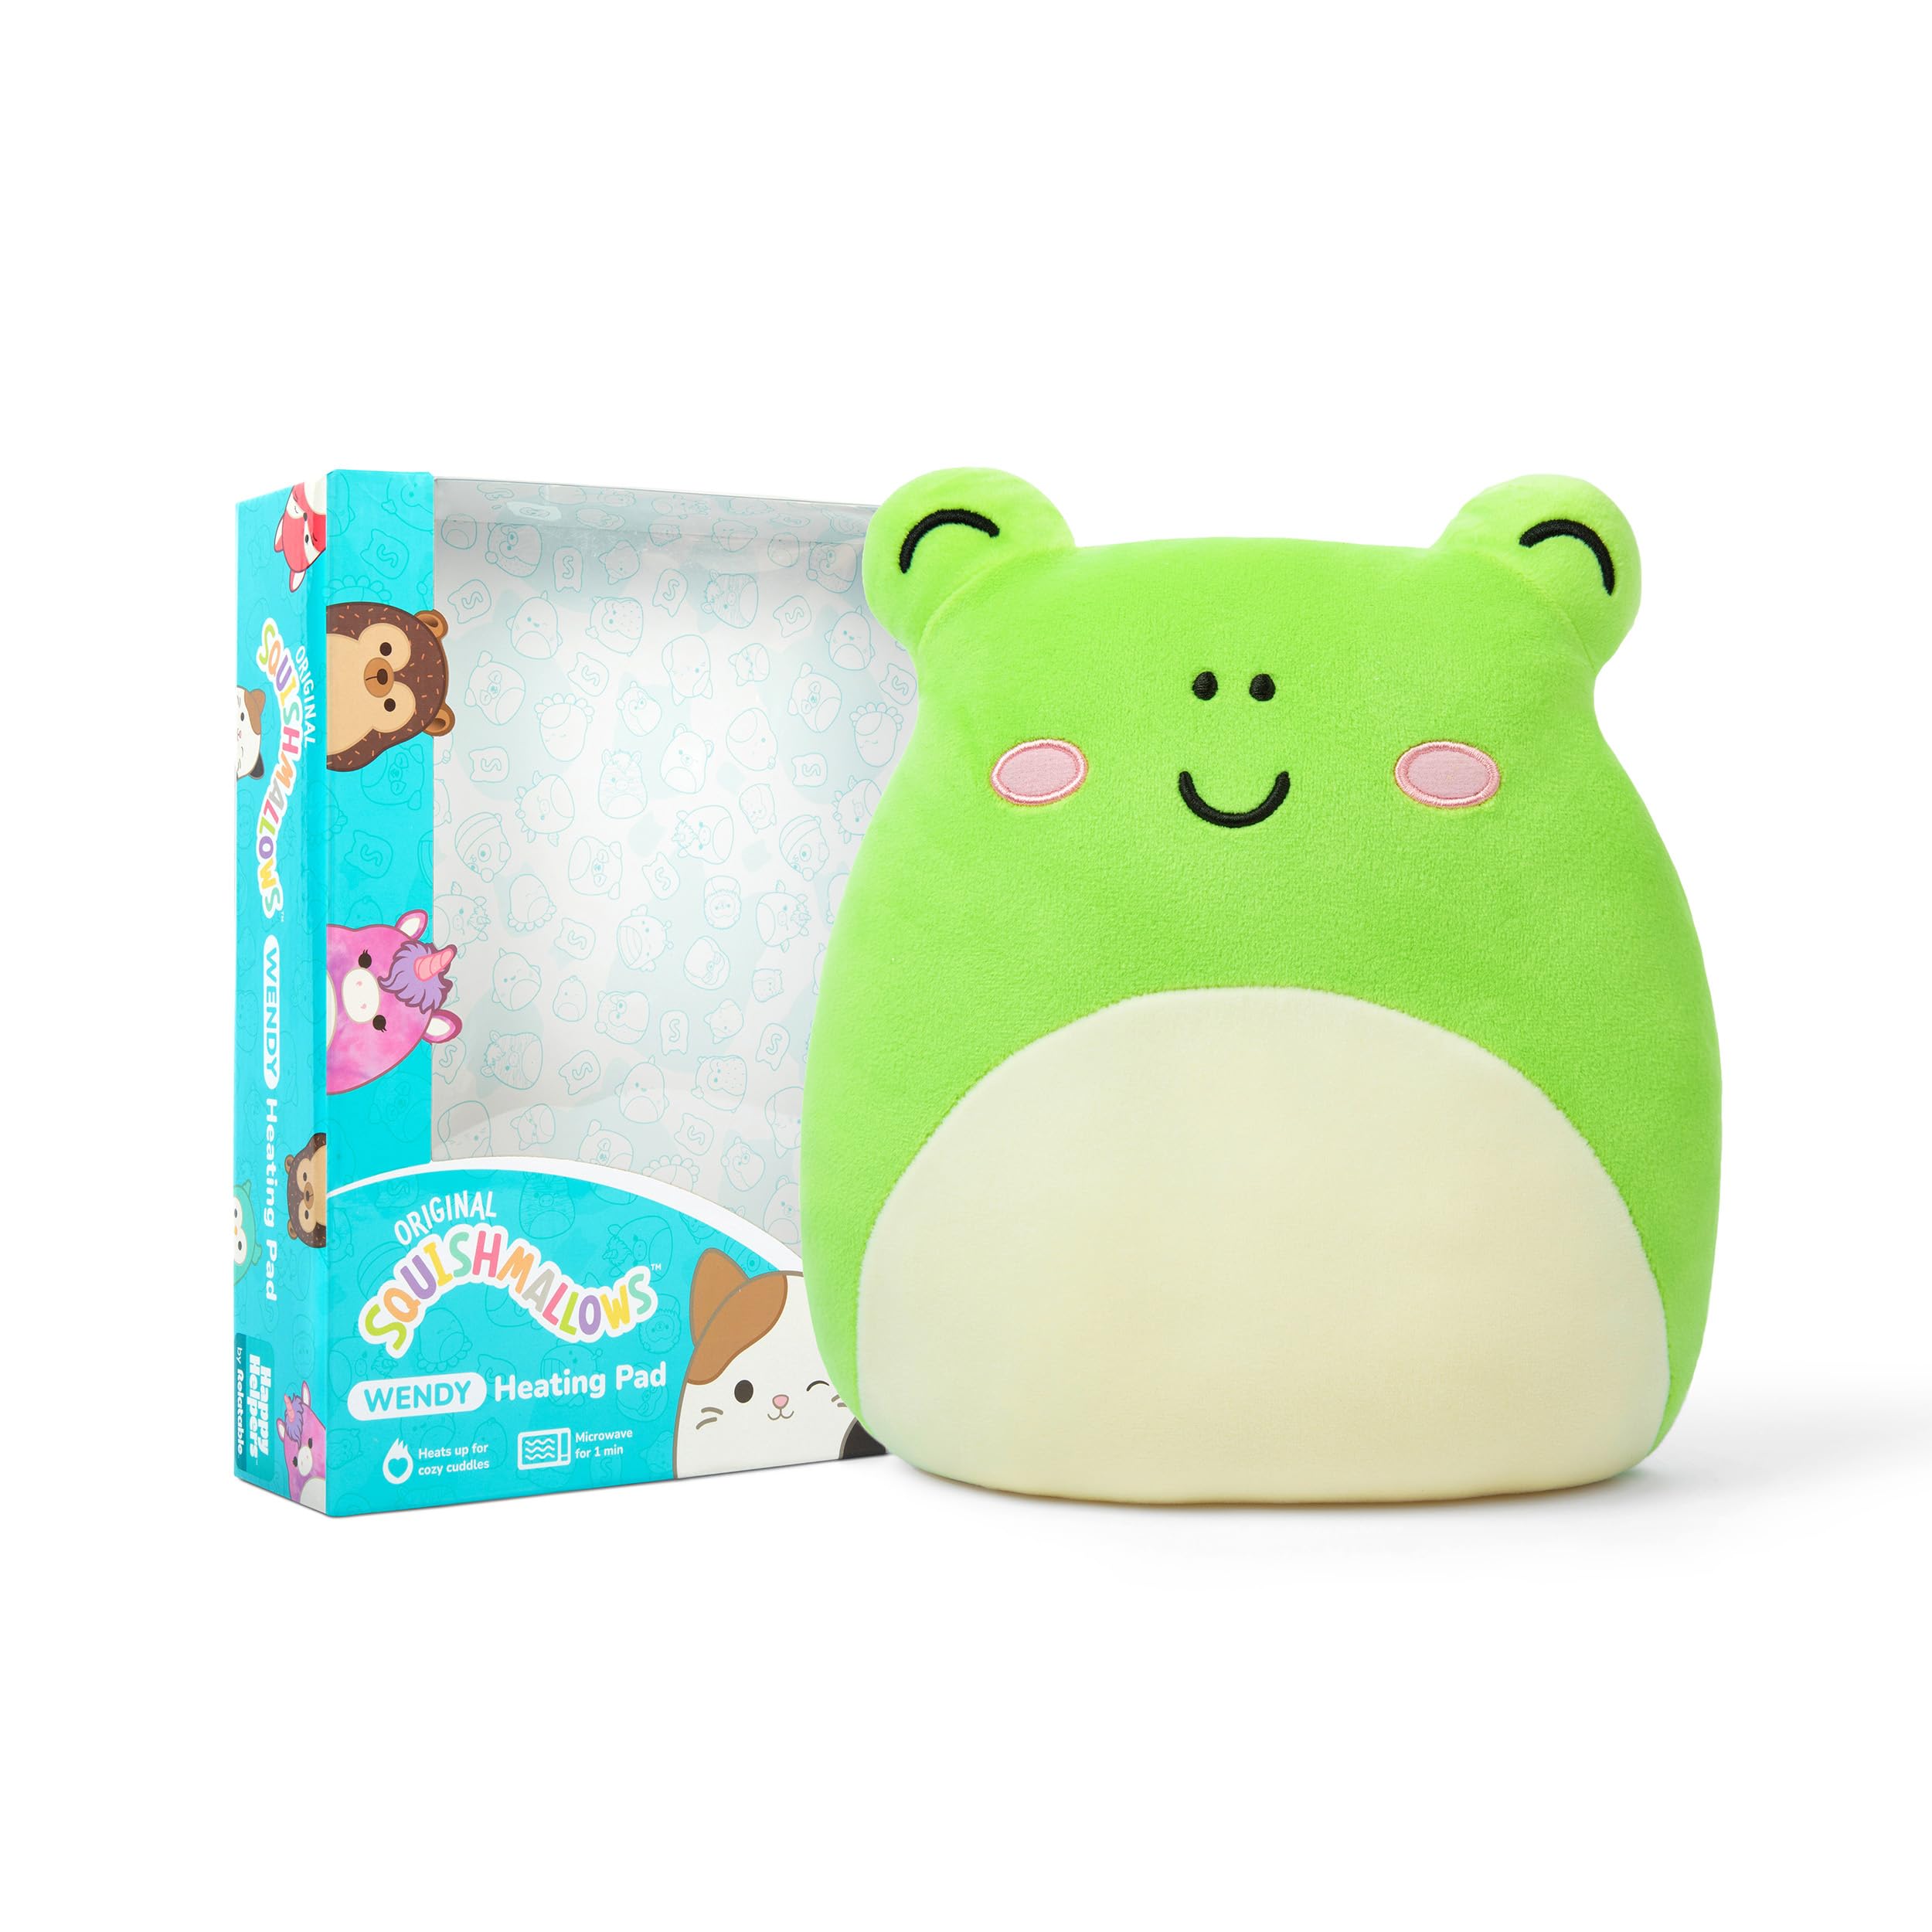 Squishmallows Wendy Heating Pad - Squishmallows Heating Pads for Cramps by Relatable